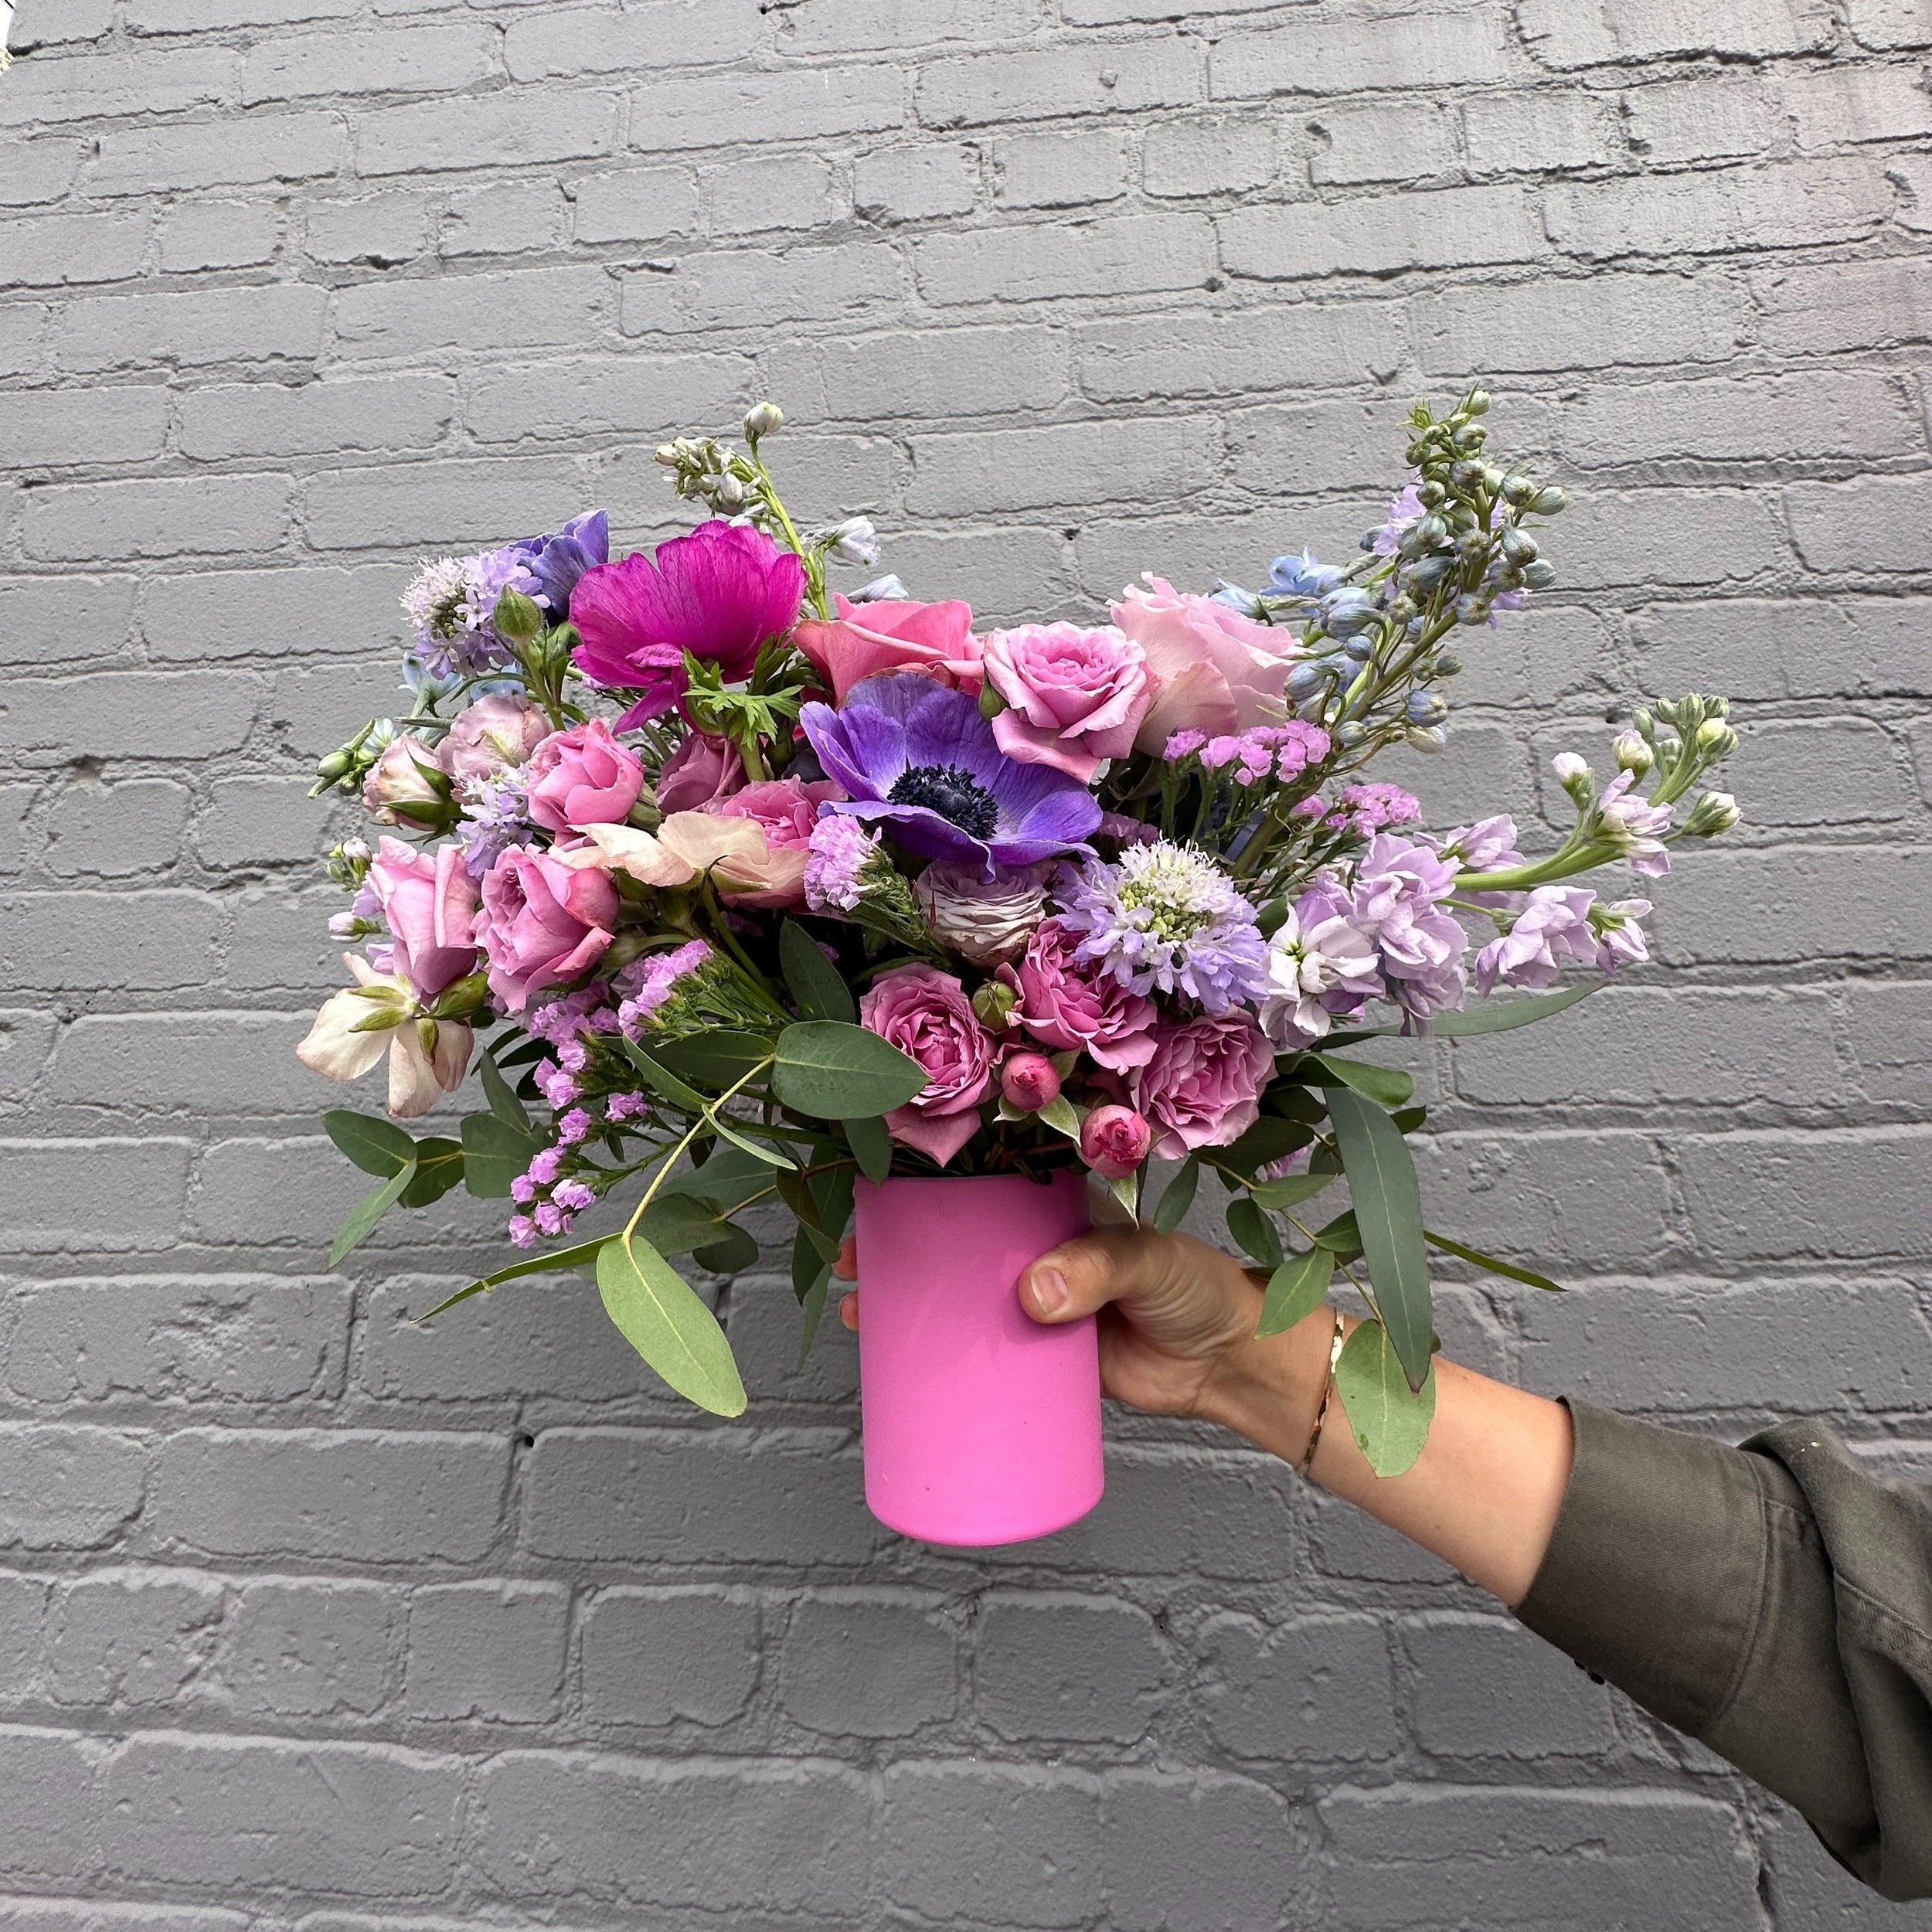 Medium sized vase arrangement with pink and purple flowers being held by one hand in front of a grey brick wall